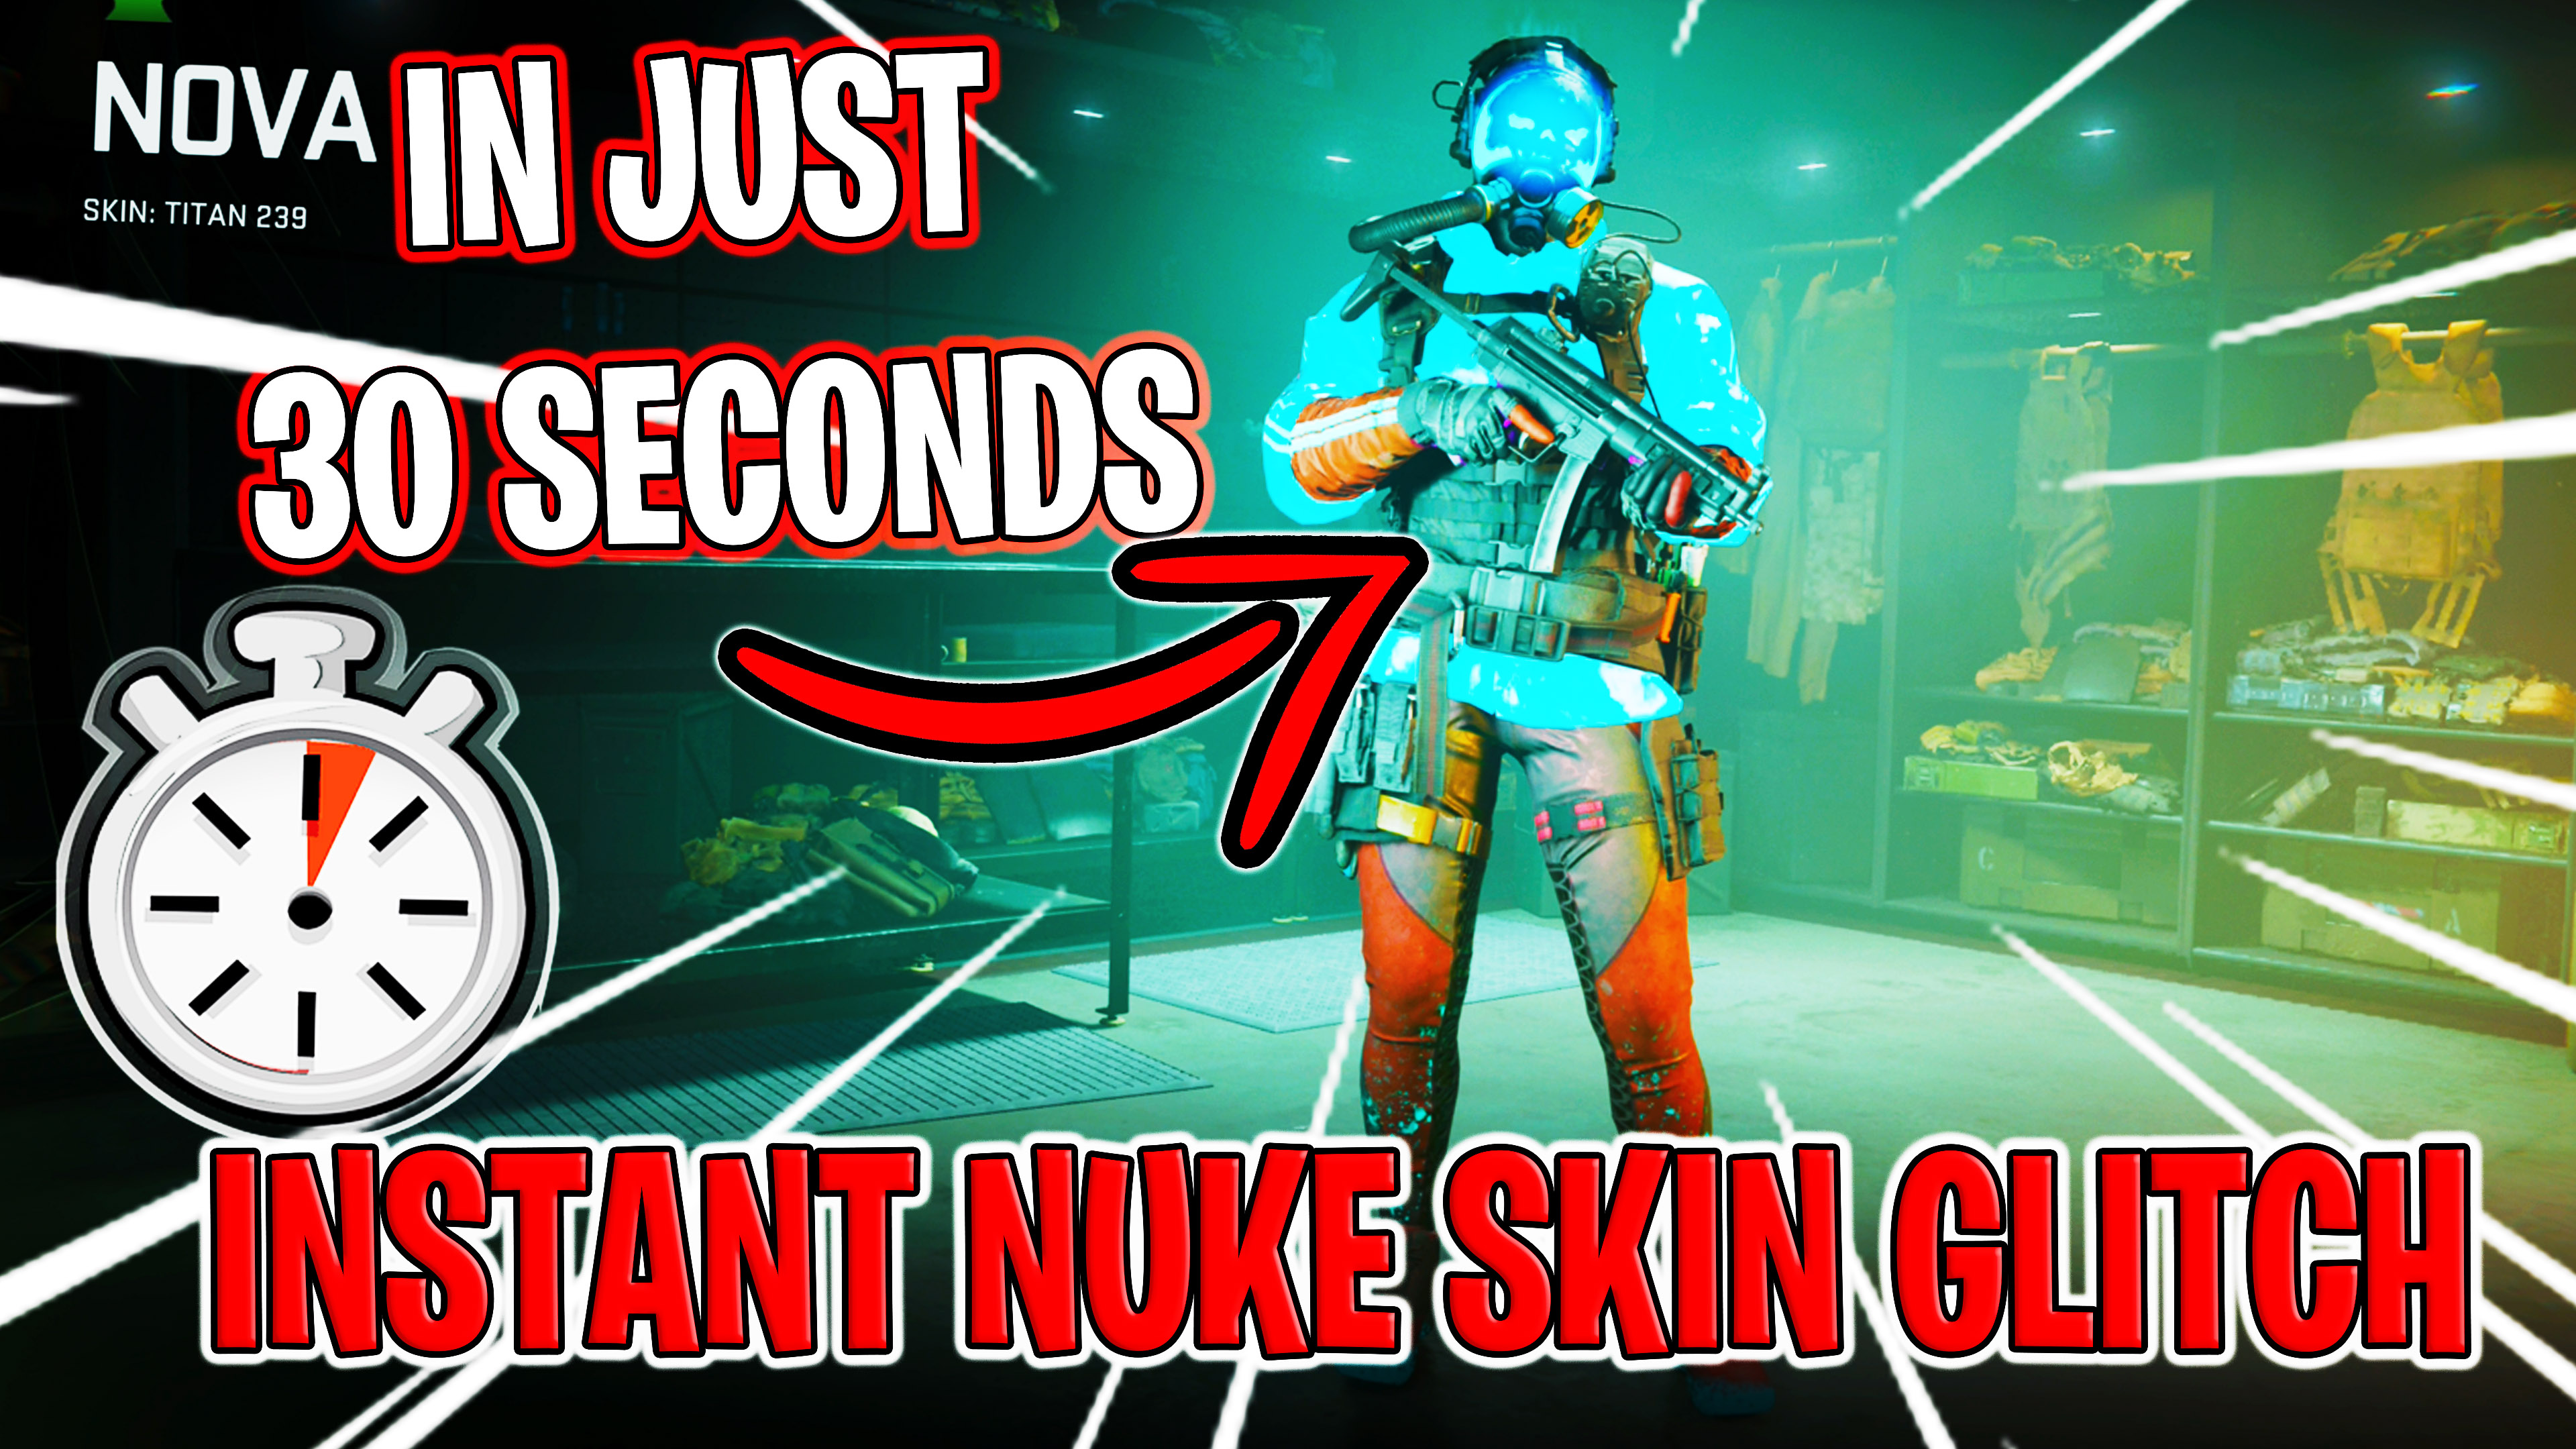 Warzone 2's new nuke skin immediately roasted by fans: “Is this